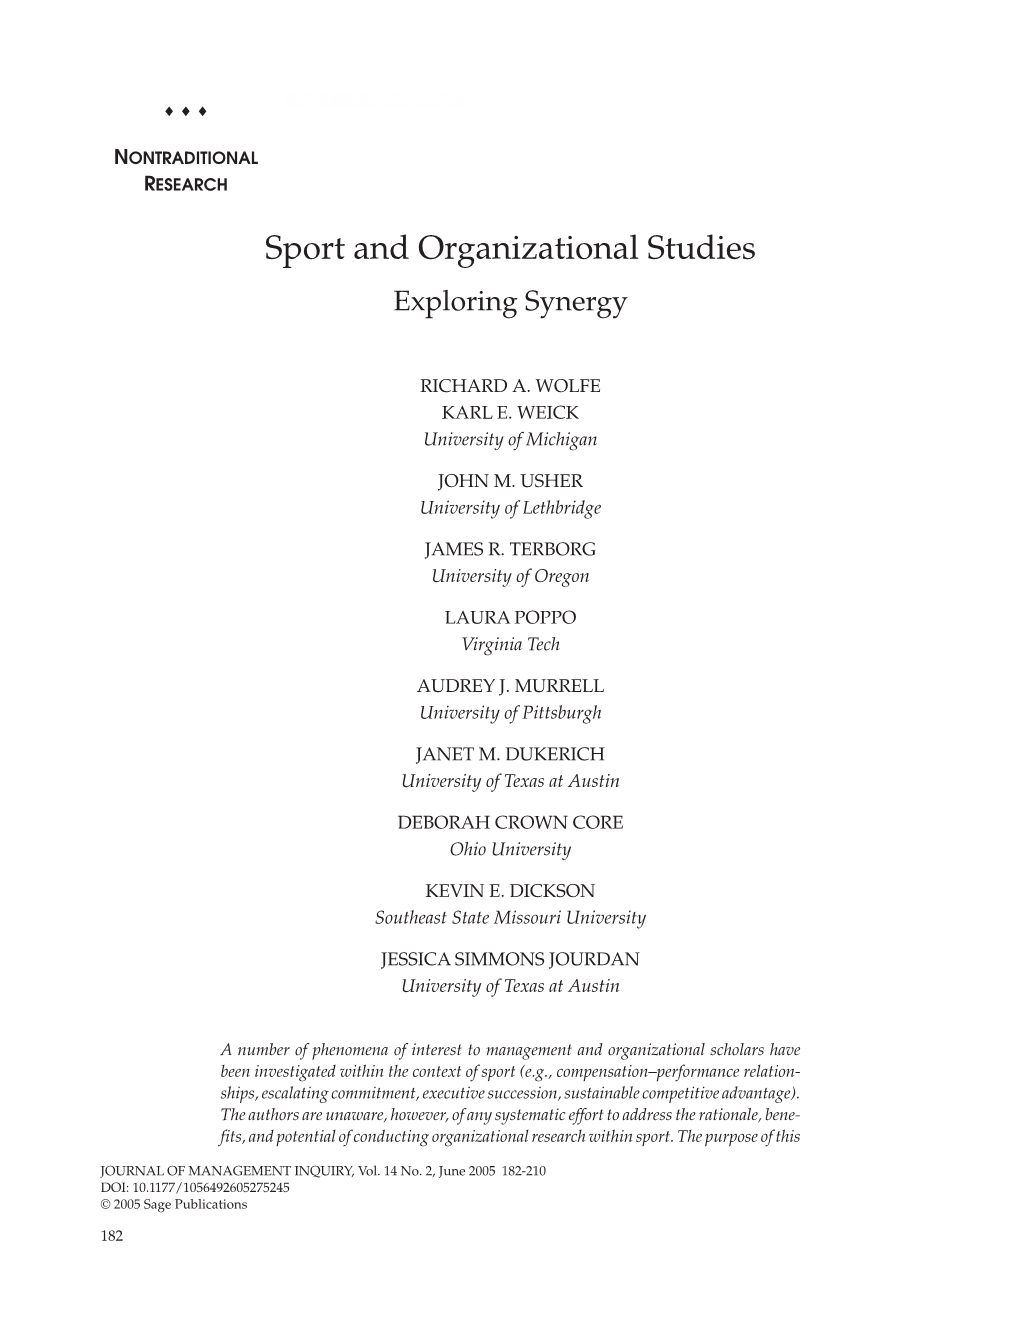 Sport and Organizational Studies Exploring Synergy